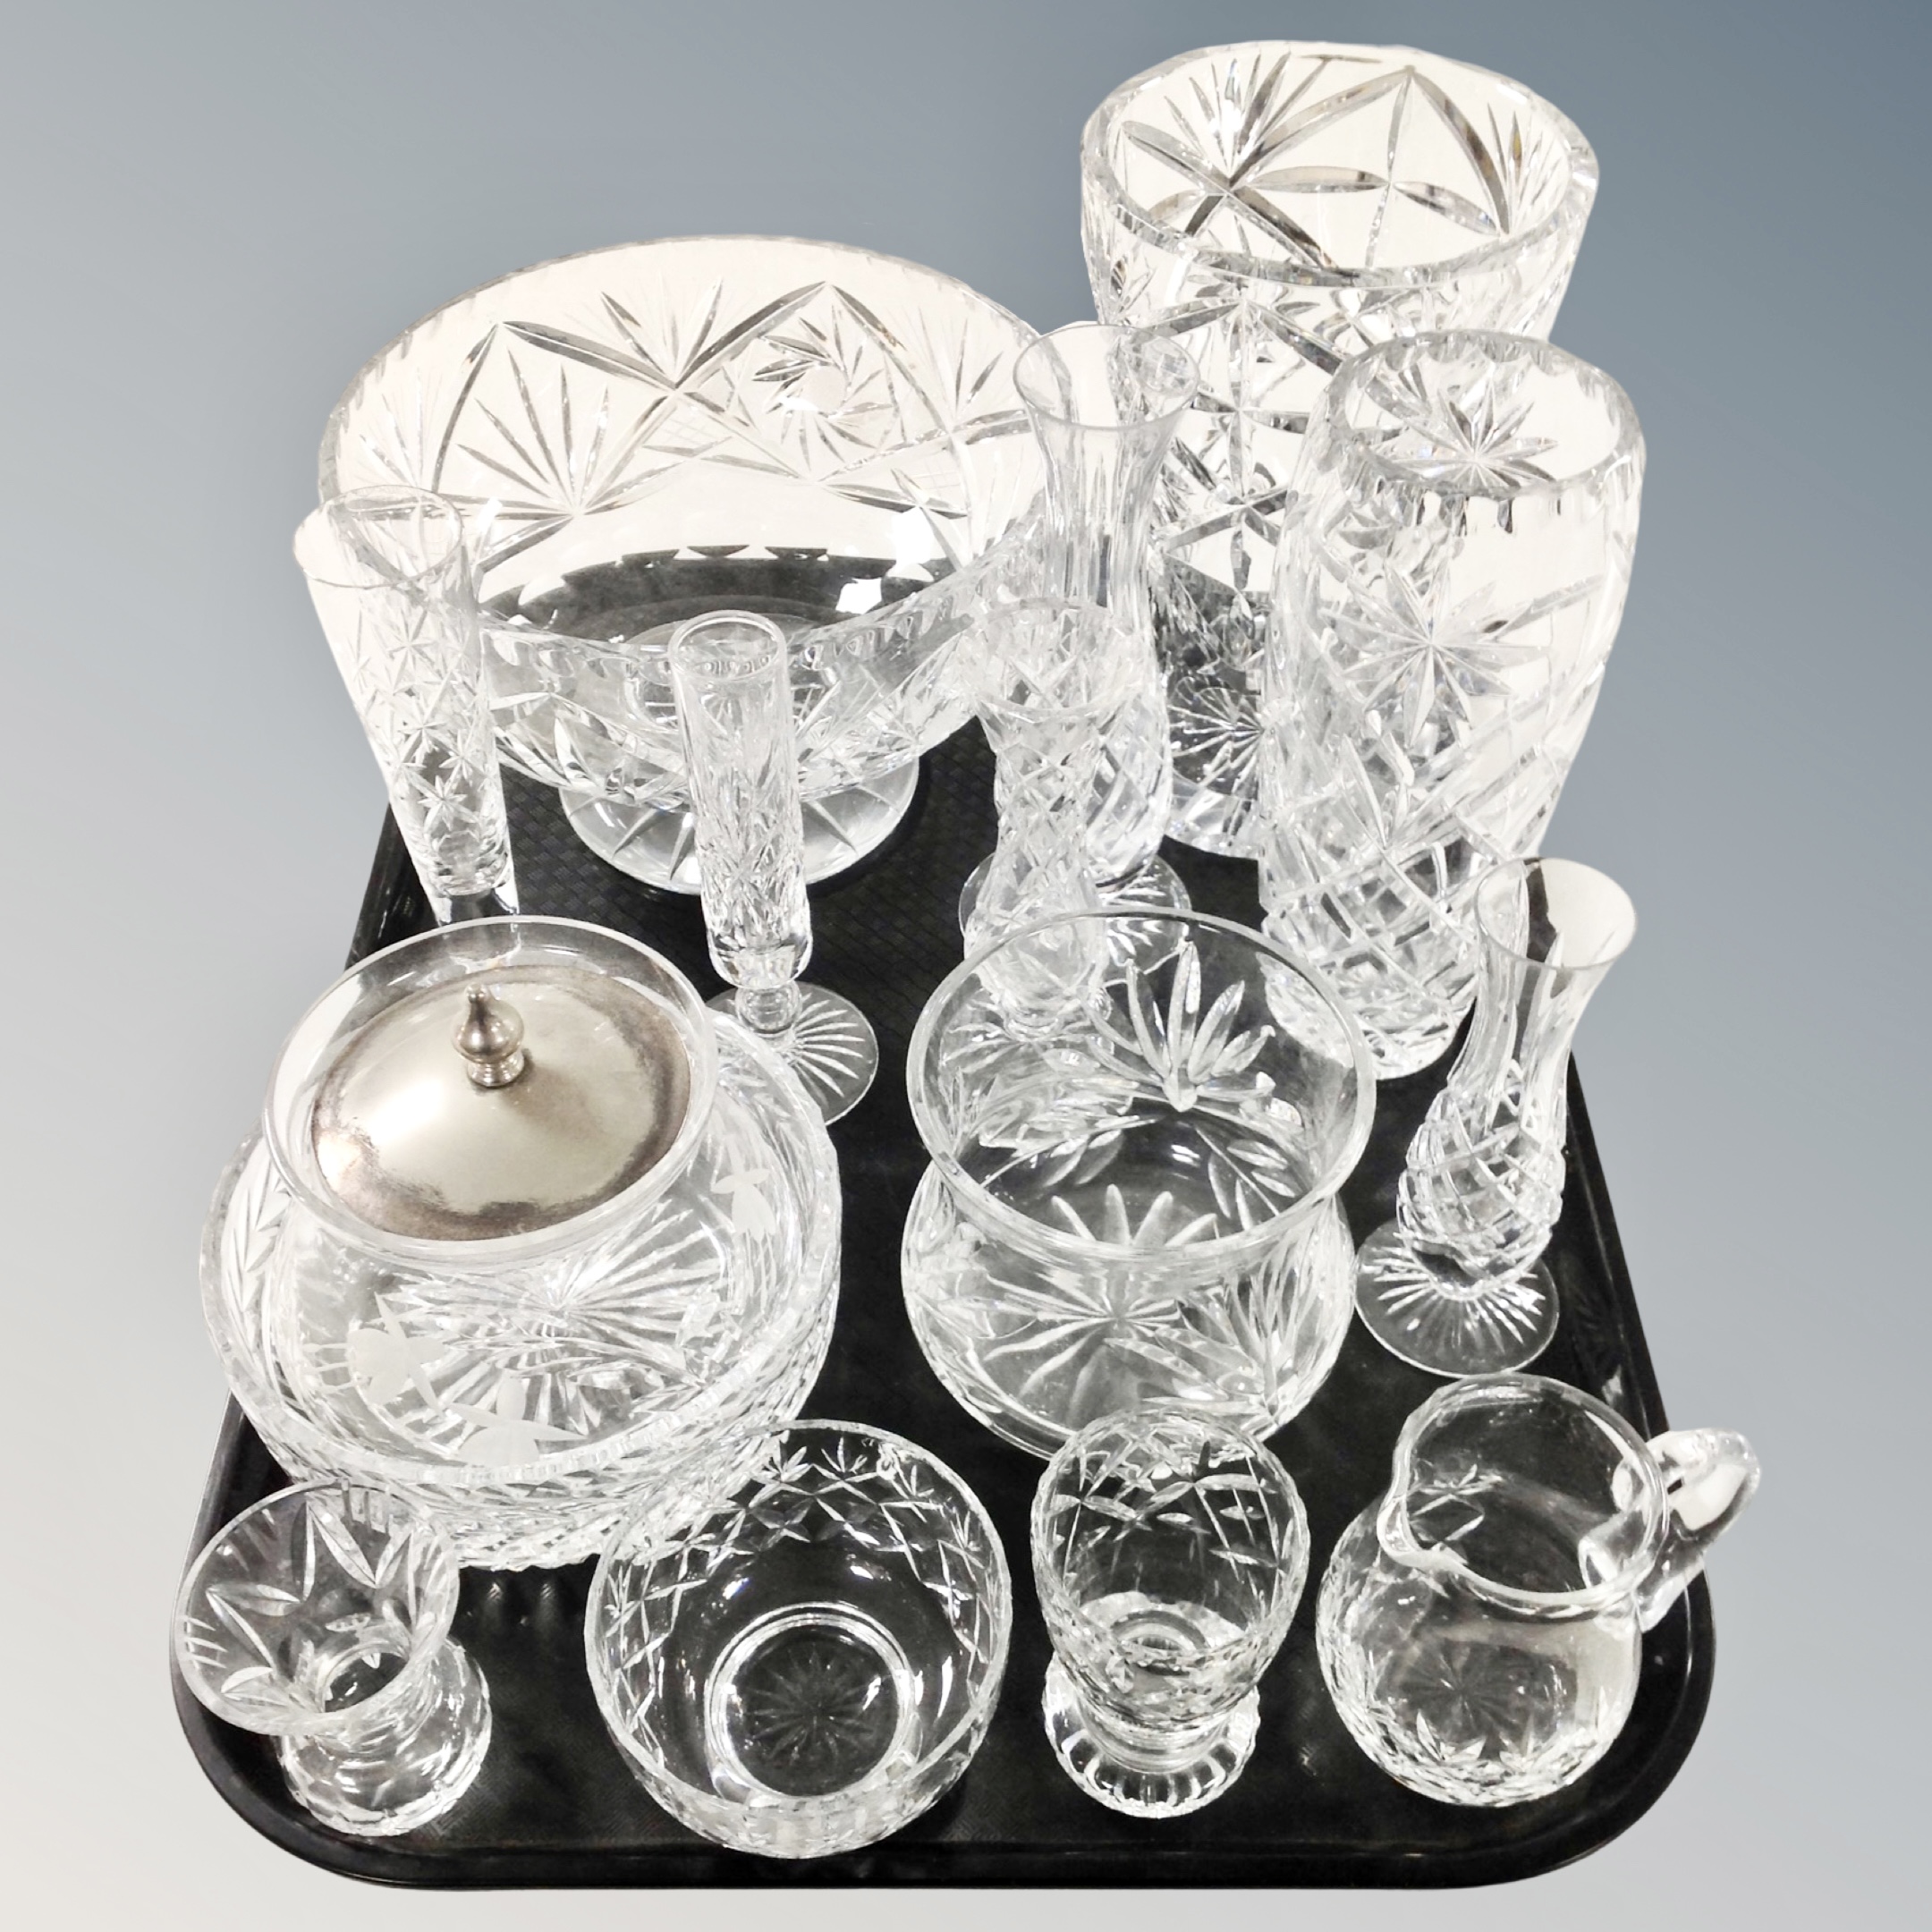 A tray of assorted glass ware, lead crystal bowls, bud vases,